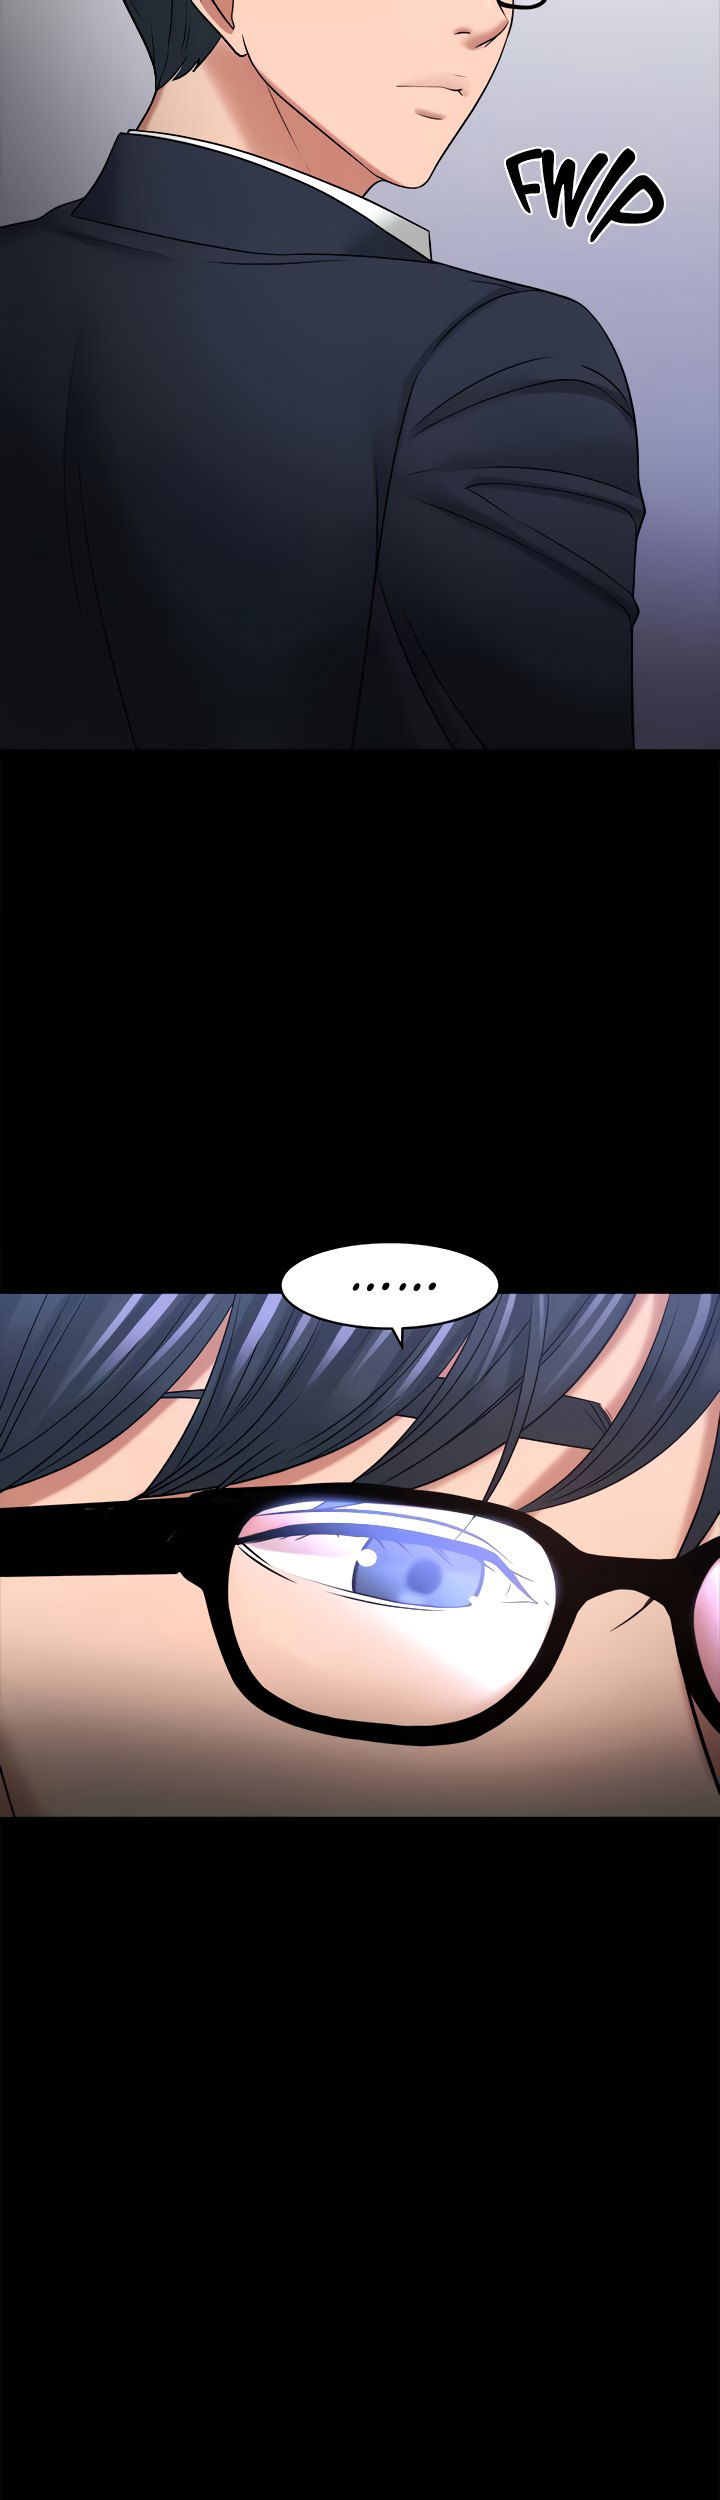 are-you-just-going-to-watch-chap-48-48